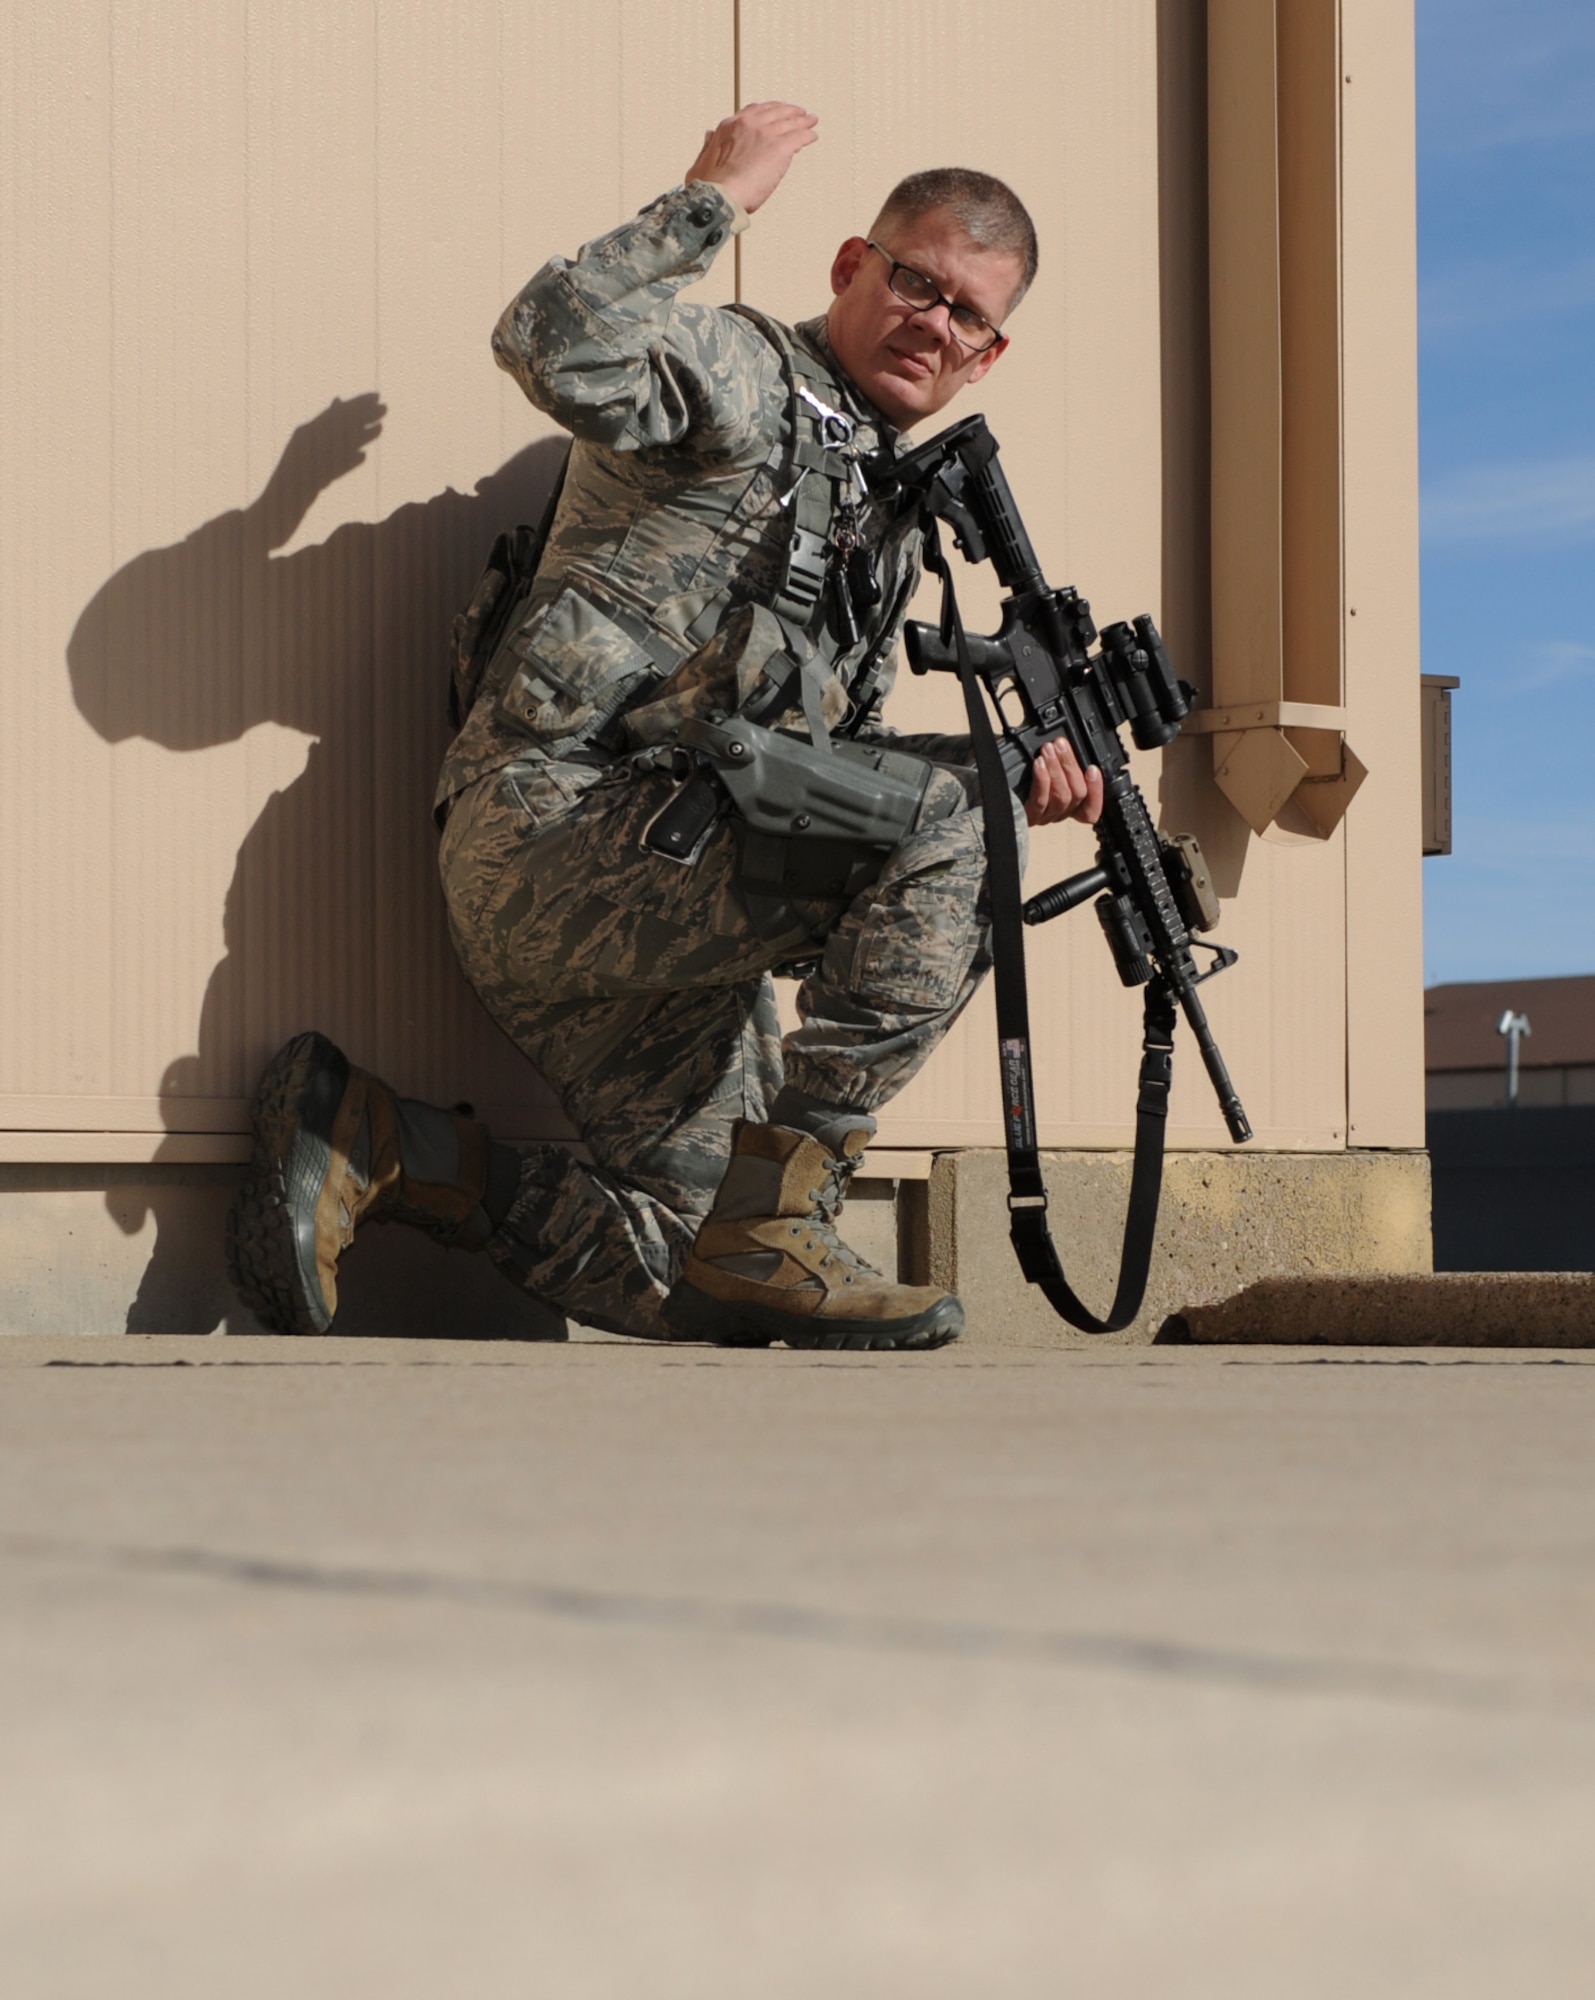 Tech. Sgt. Steven Groff, 28th Security Forces Squadron flight chief, signals for his partner to advance during a training exercise at Ellsworth Air Force Base, S.D., Feb. 10, 2016. Training exercises ensure defenders are ready to perform their duty at any time, whether at home or deployed. (U.S. Air Force photo by Airman 1st Class Denise M. Nevins/Released)